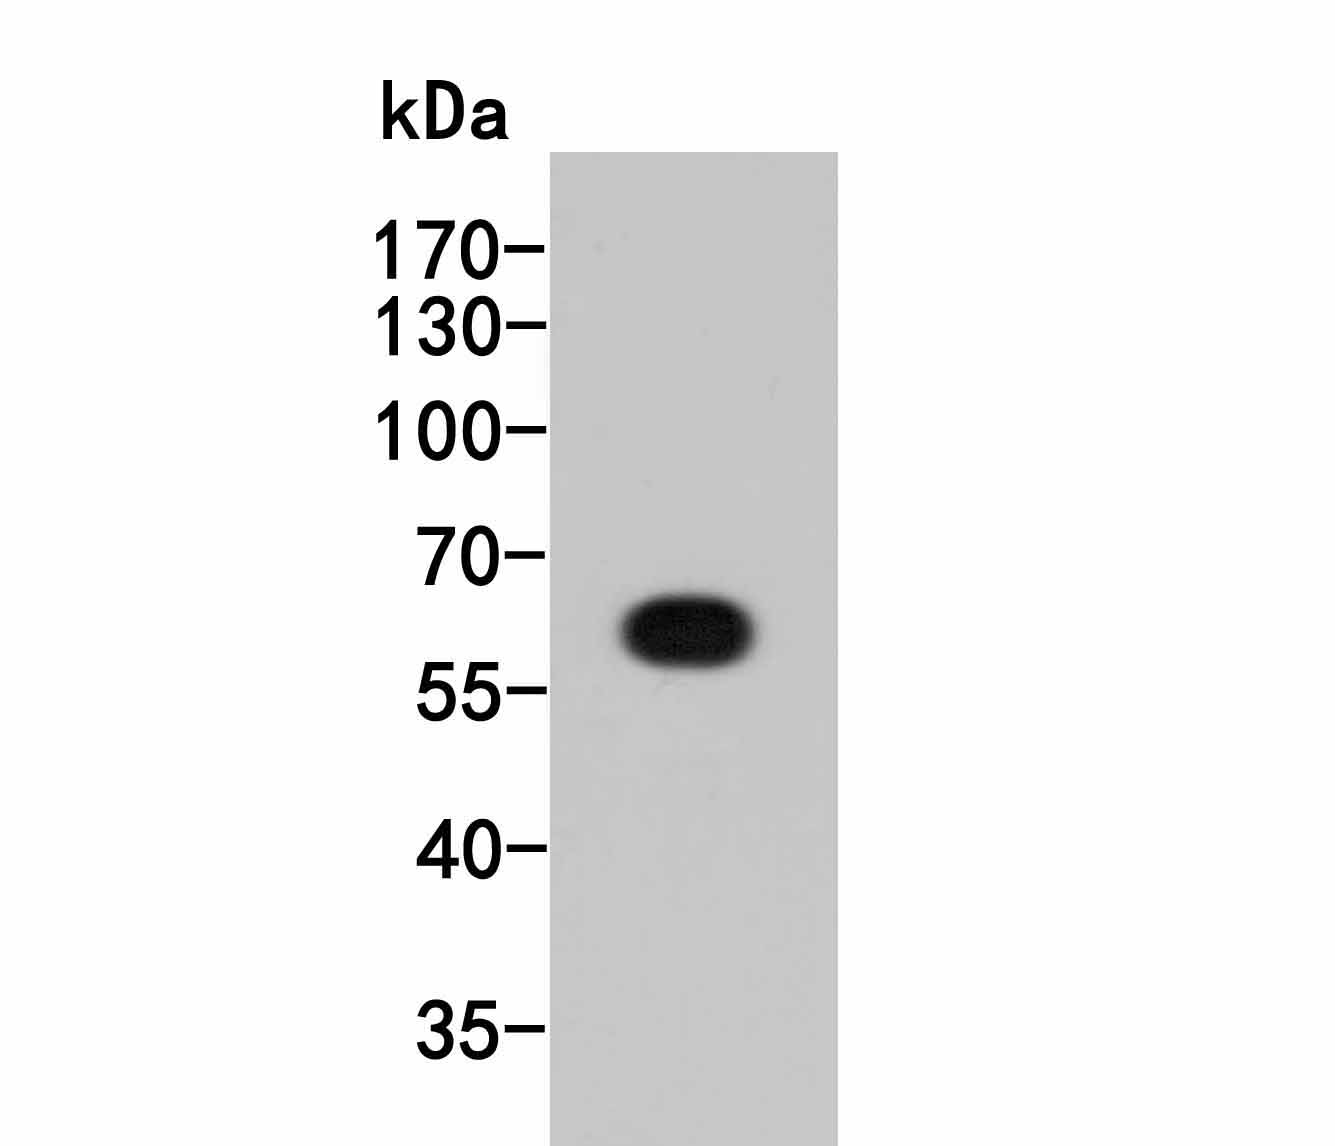 Western blot analysis of HA tag on HA tag recombinant protein. Proteins were transferred to a PVDF membrane and blocked with 5% BSA in PBS for 1 hour at room temperature. The primary antibody (ET1611-49) was used in 5% BSA at room temperature for 2 hours. Goat Anti-Rabbit IgG - HRP Secondary Antibody (HA1001) at 1:5,000 dilution was used for 1 hour at room temperature.